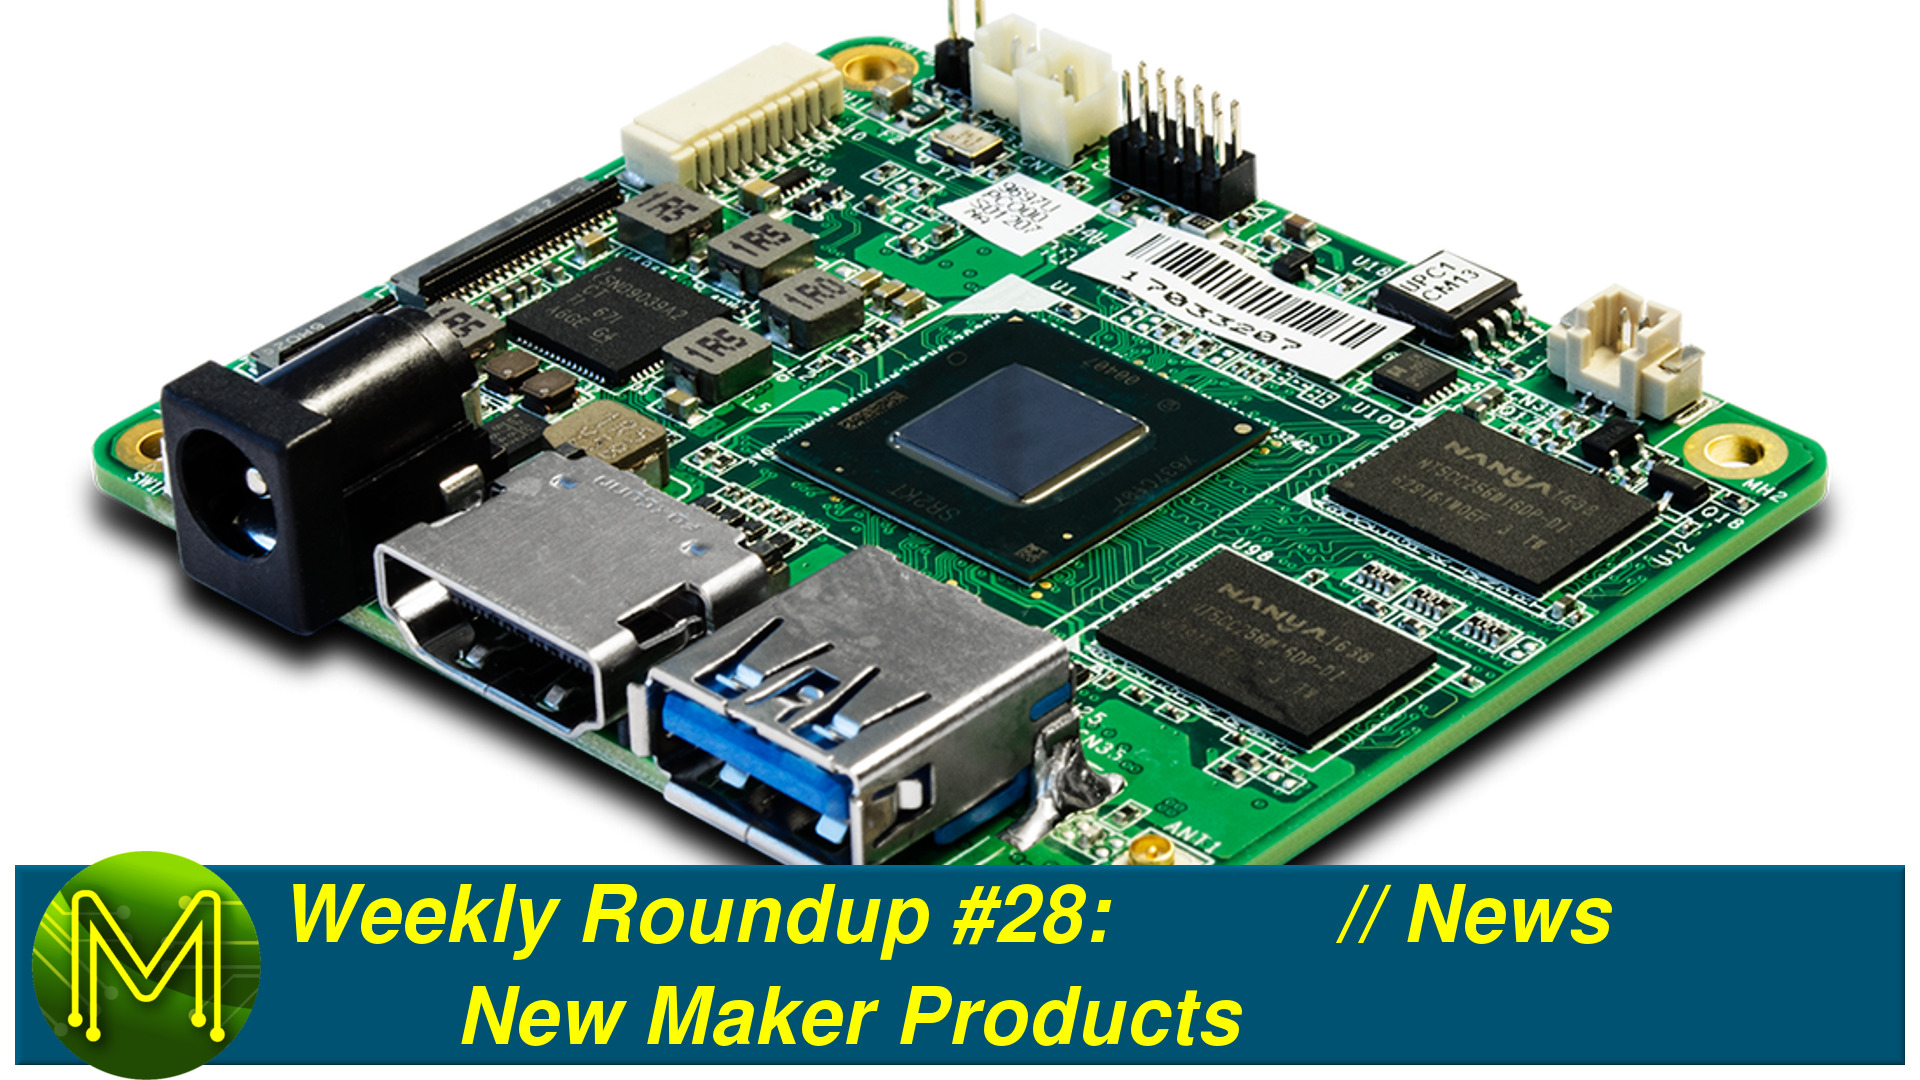 Weekly Roundup #28 - New Maker Products // News